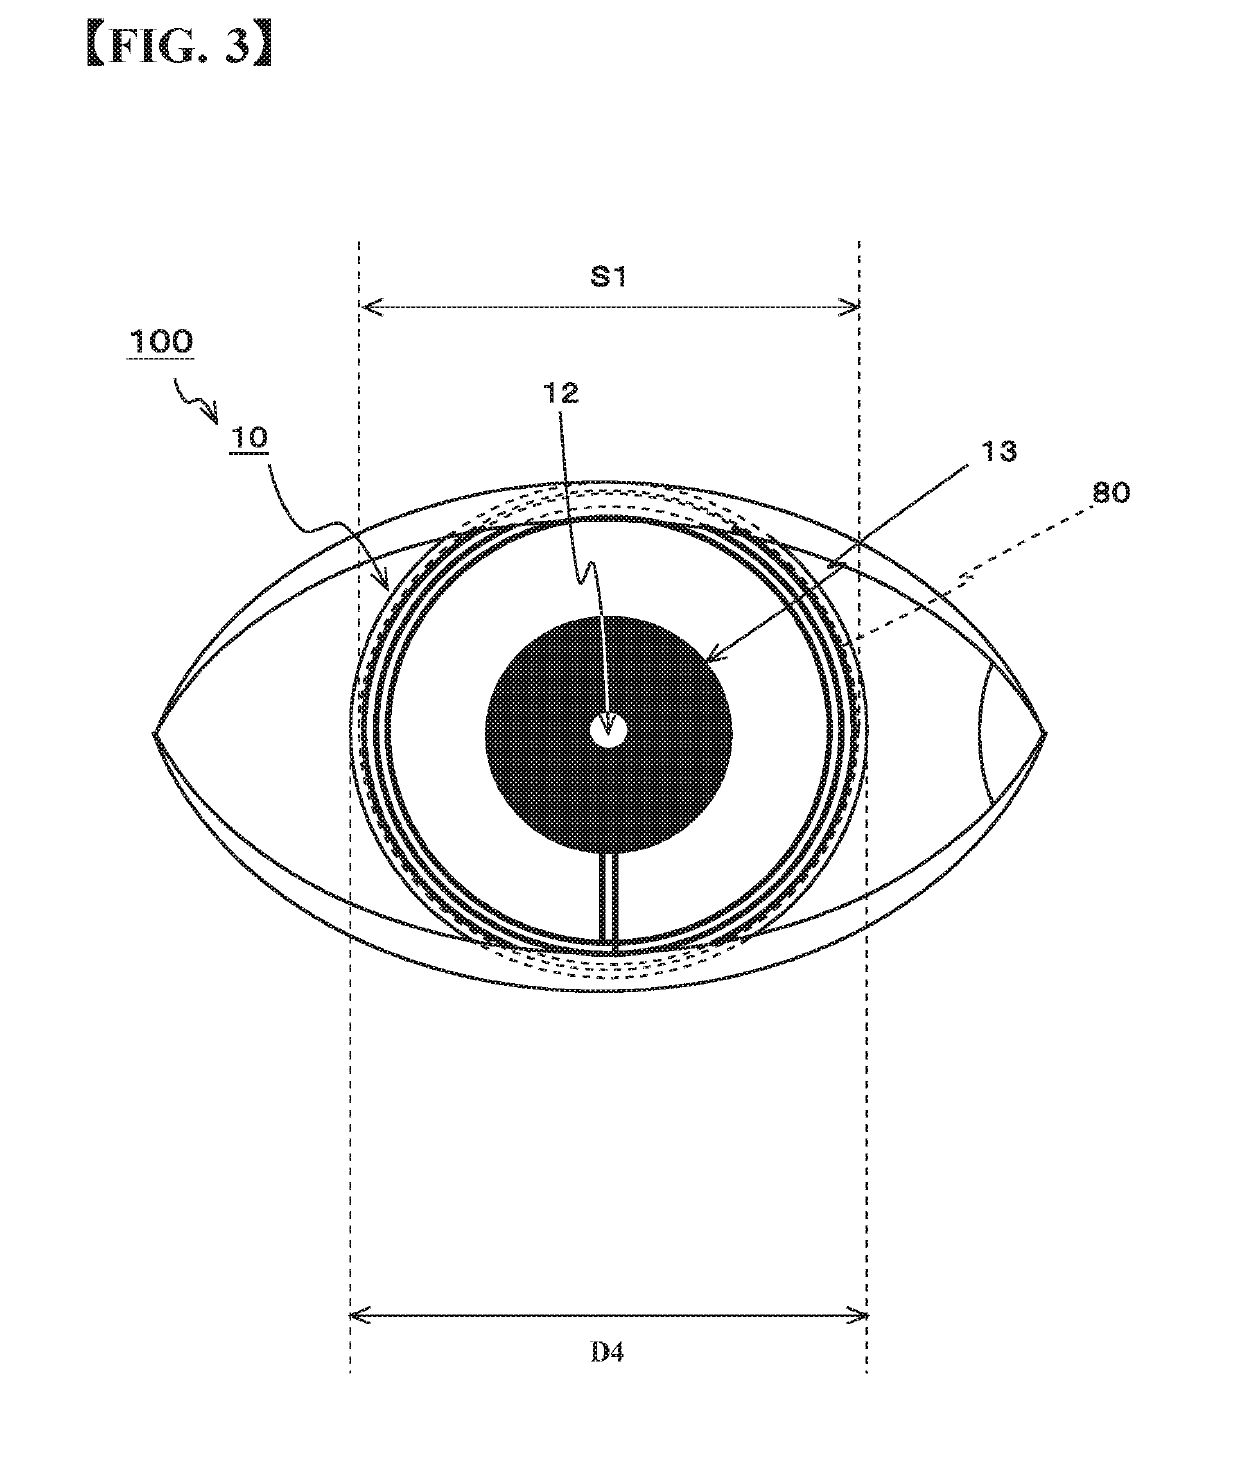 Pinhole contact lens and smart contact system